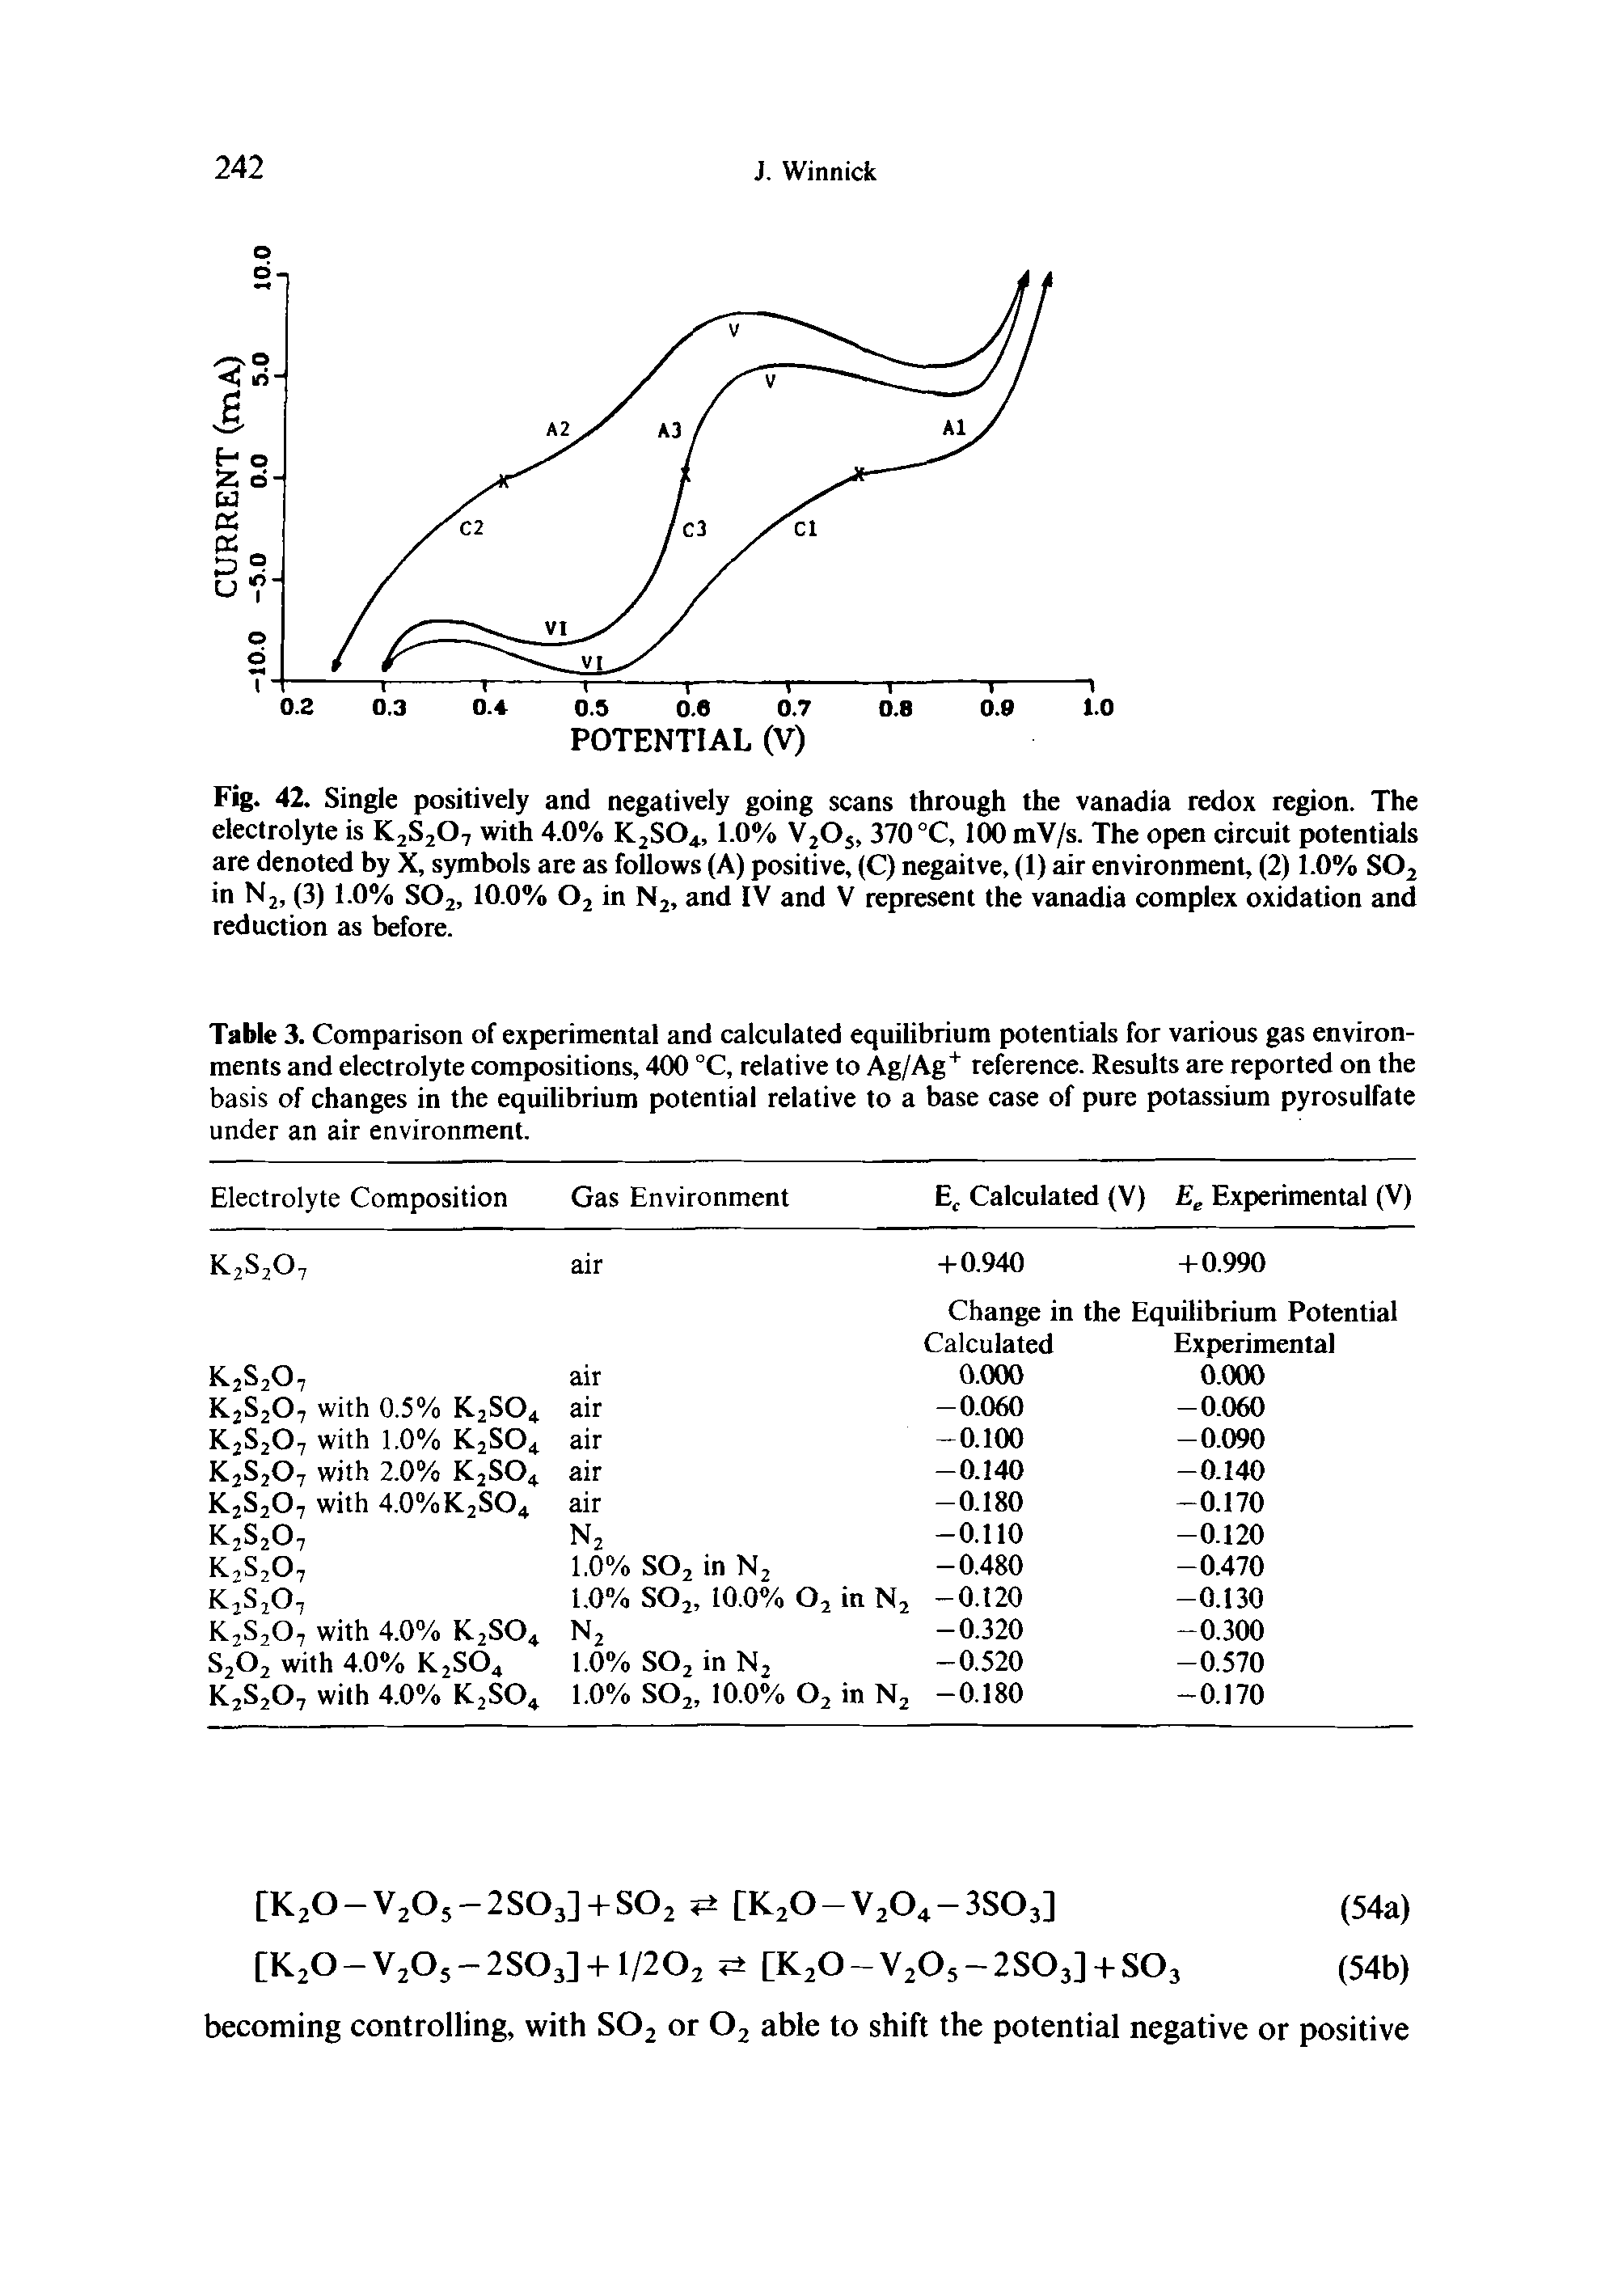 Table 3. Comparison of experimental and calculated equilibrium potentials for various gas environments and electrolyte compositions, 400 °C, relative to Ag/Ag+ reference. Results are reported on the basis of changes in the equilibrium potential relative to a base case of pure potassium pyrosulfate under an air environment.